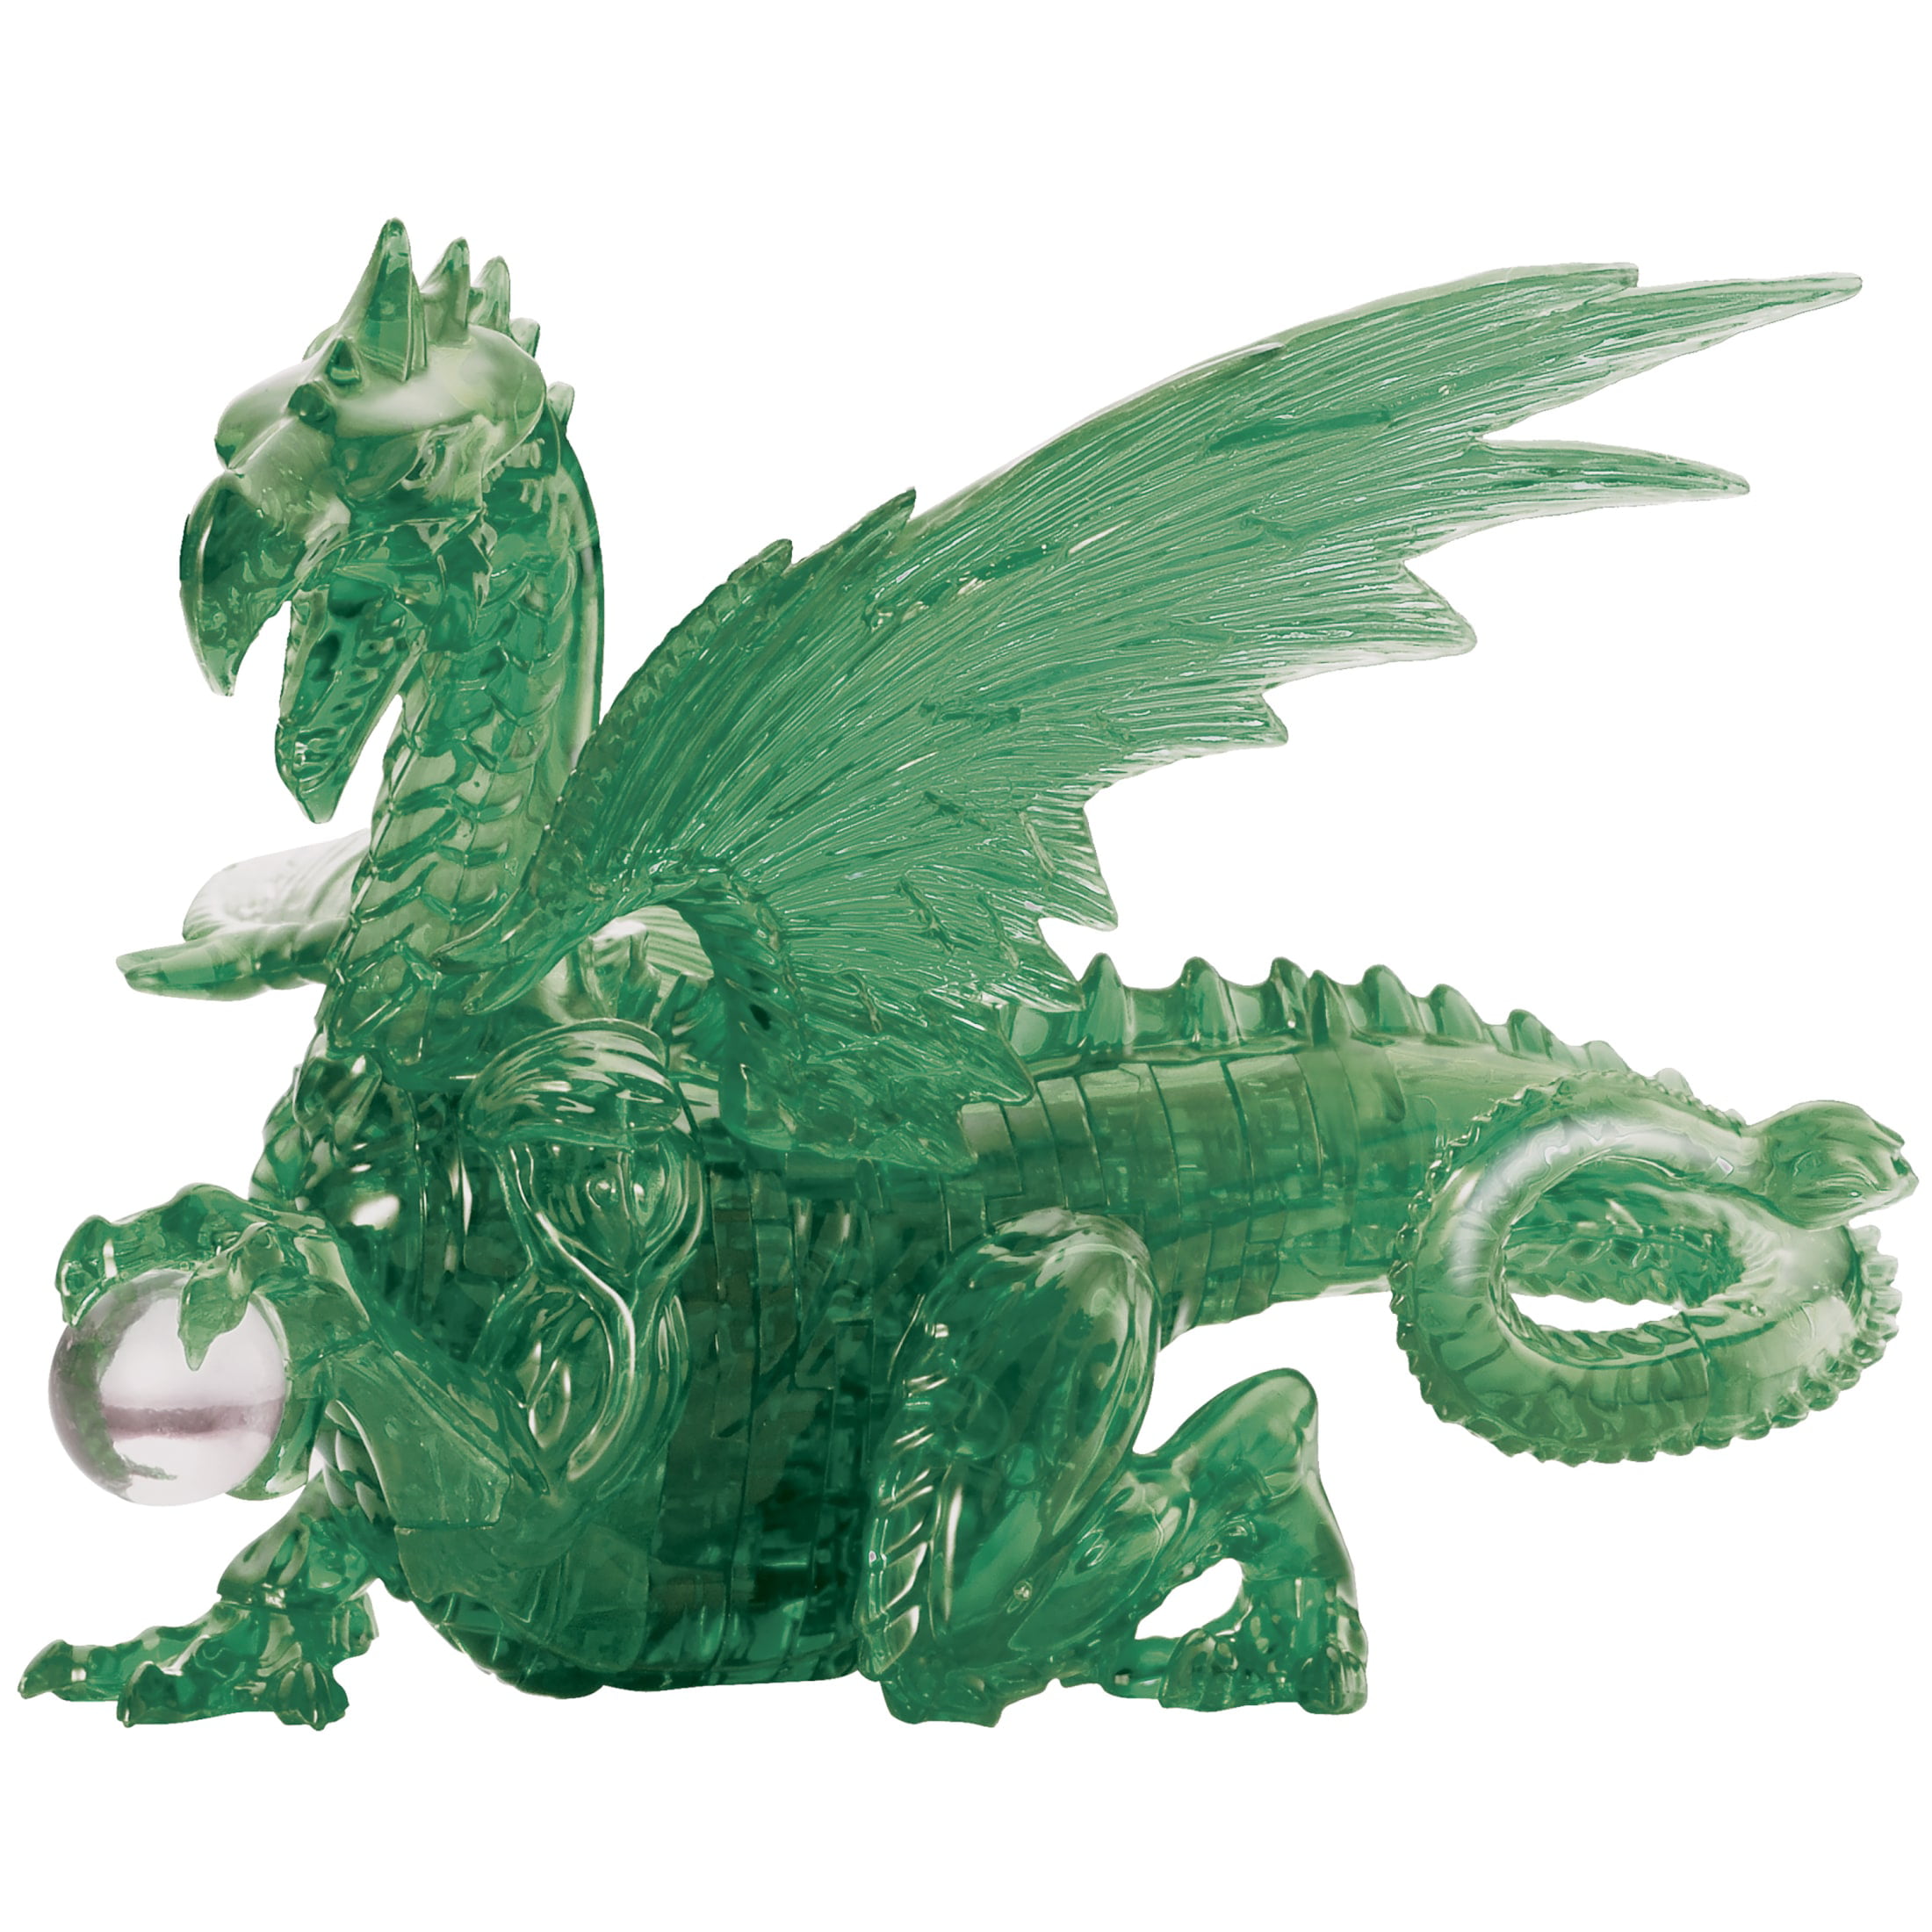 breakfast Algebraic floor Dragon Original 3D Crystal Puzzle from BePuzzled, Ages 12 and Up -  Walmart.com